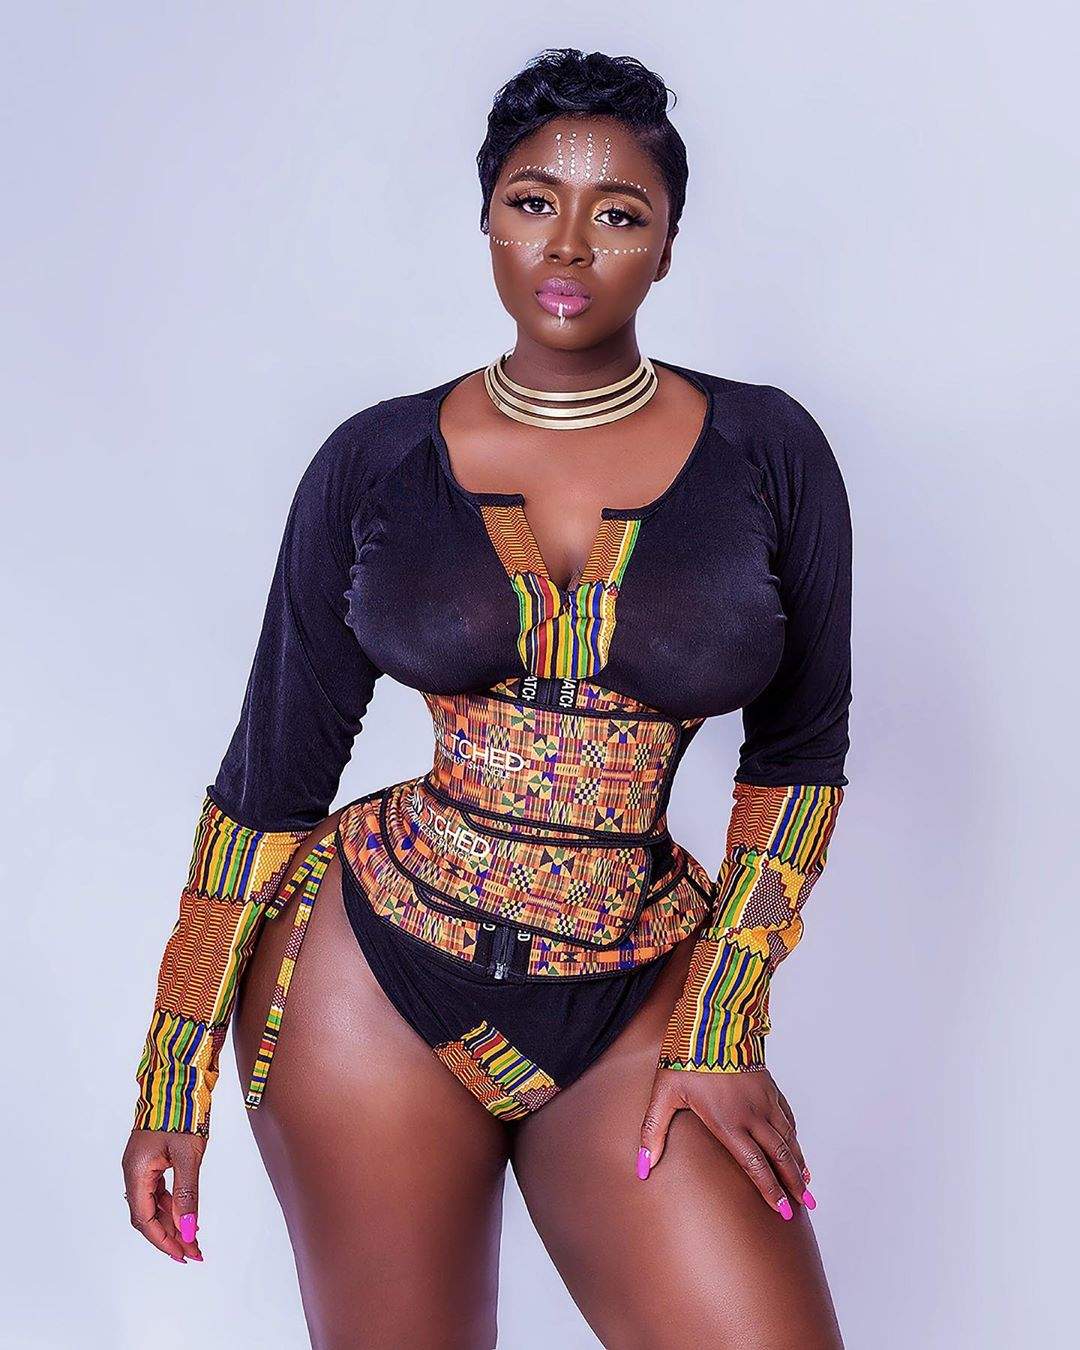 Princess Shyngle shares first DM she got from the man she's set to get married to